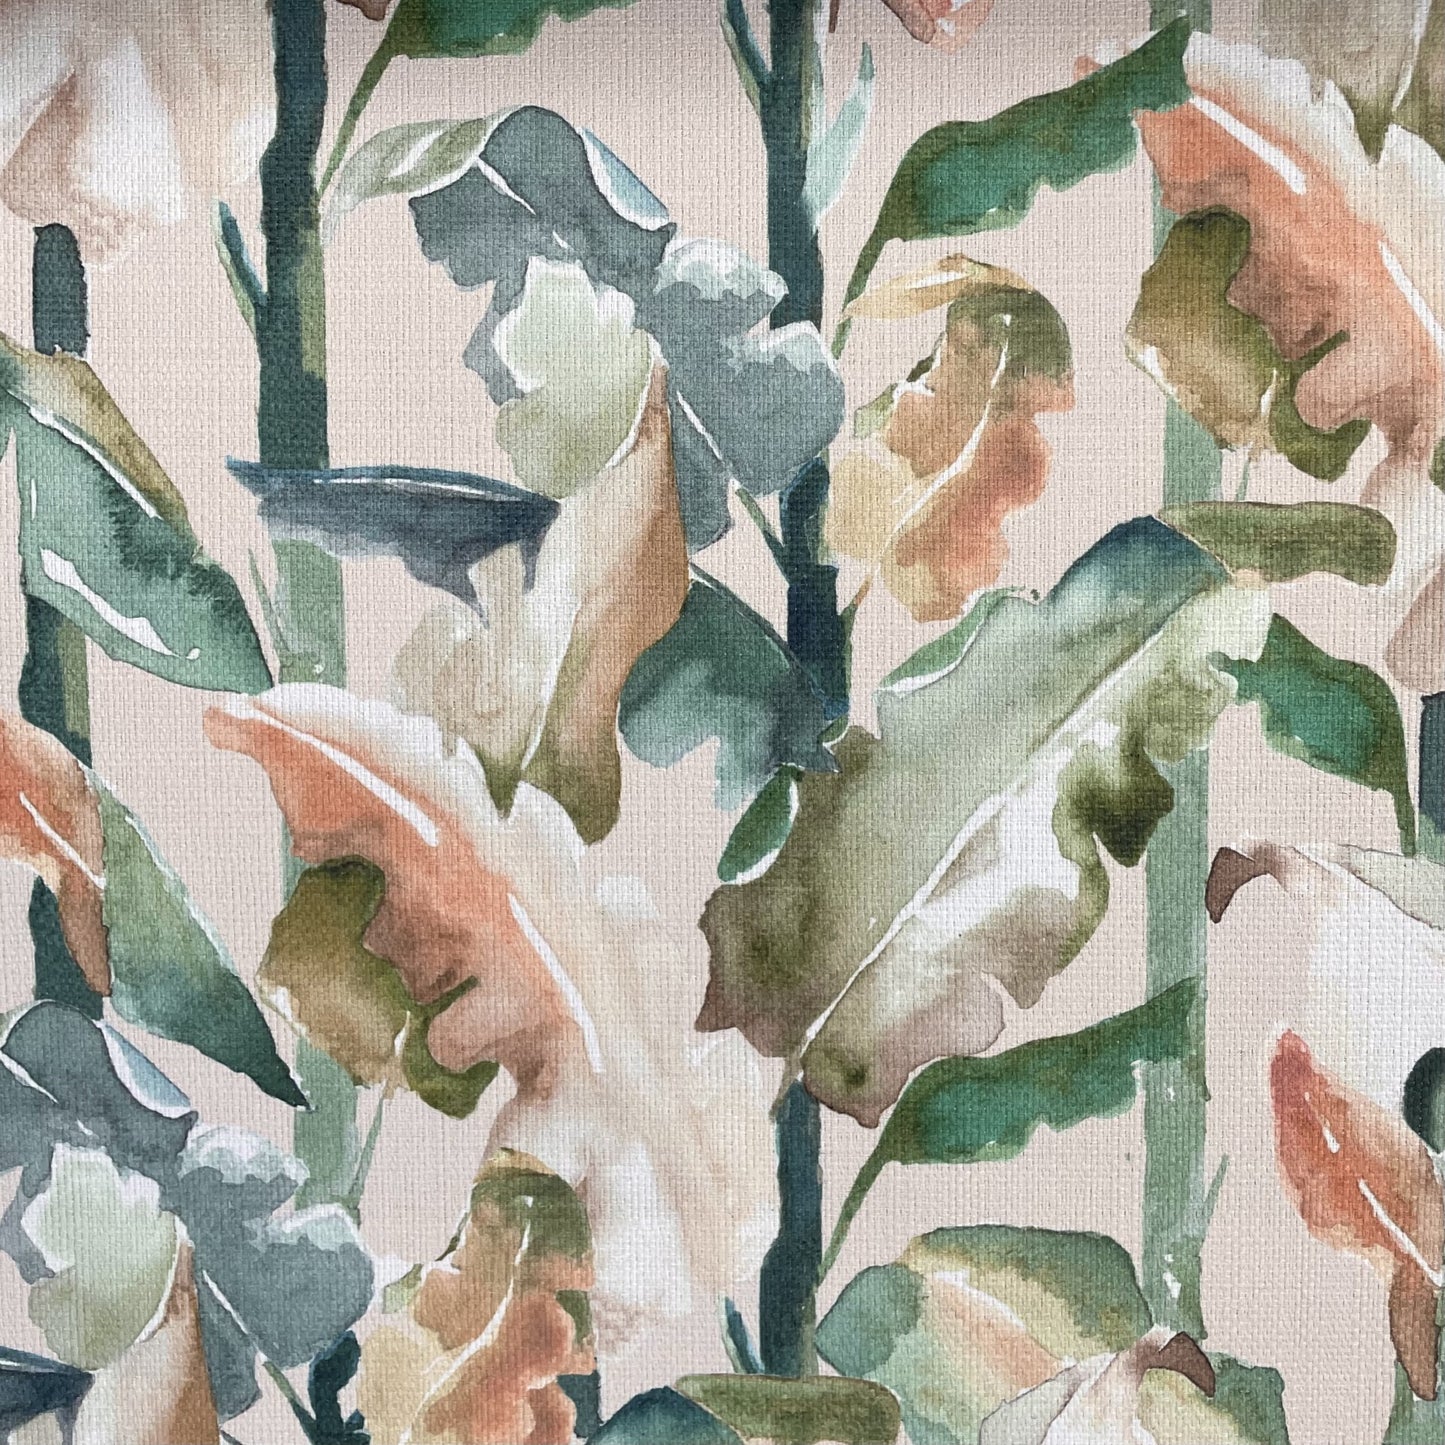 Fabric Swatch - Outdoor Natural Jungle